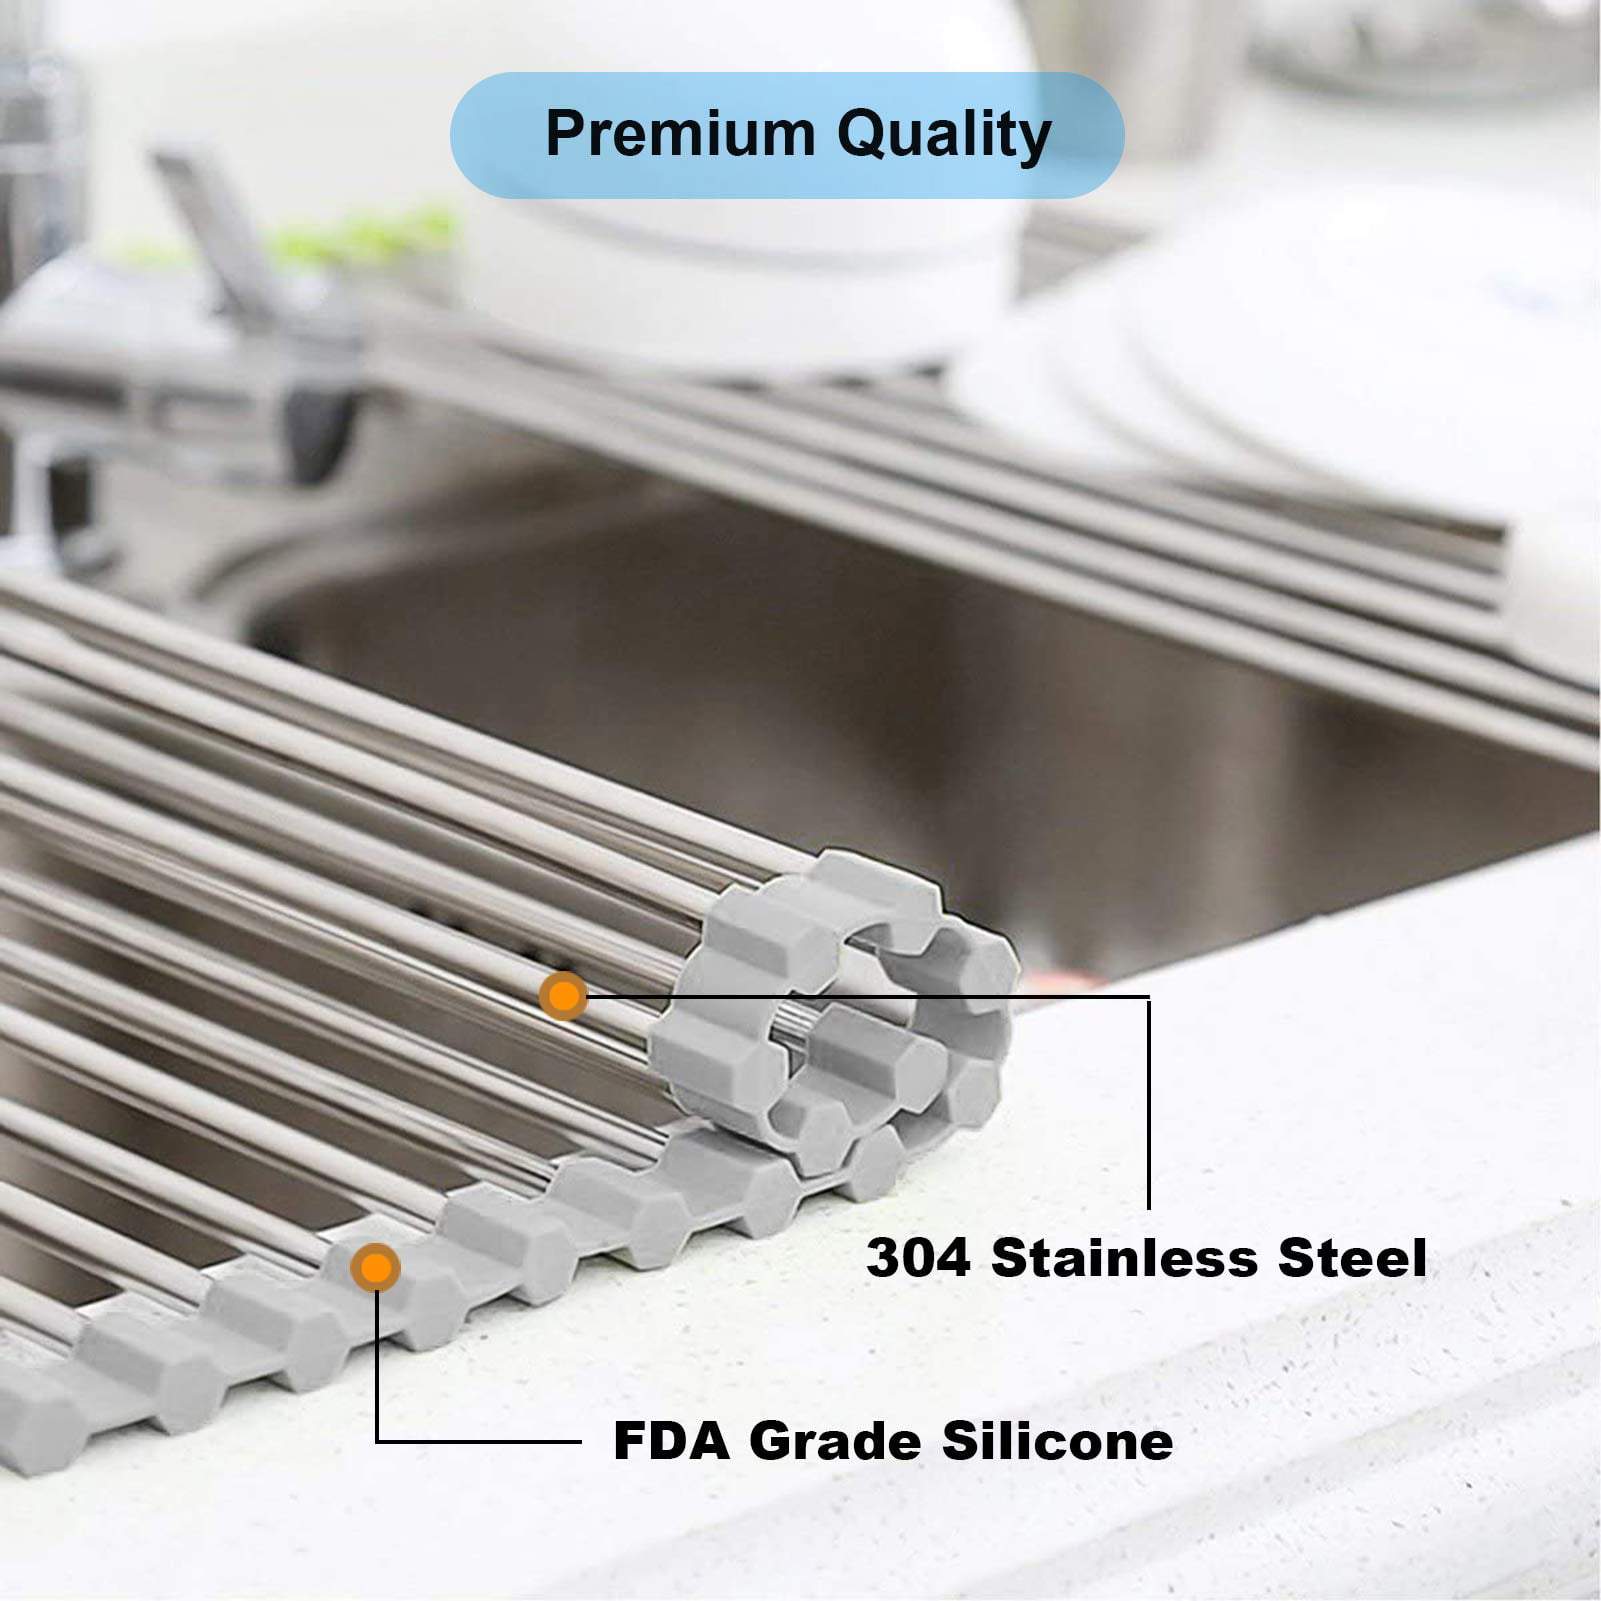 UpGood Stainless Steel Over The Sink Dish Drying Rack - Rollable, Foldable, and Easy to Store (Black)